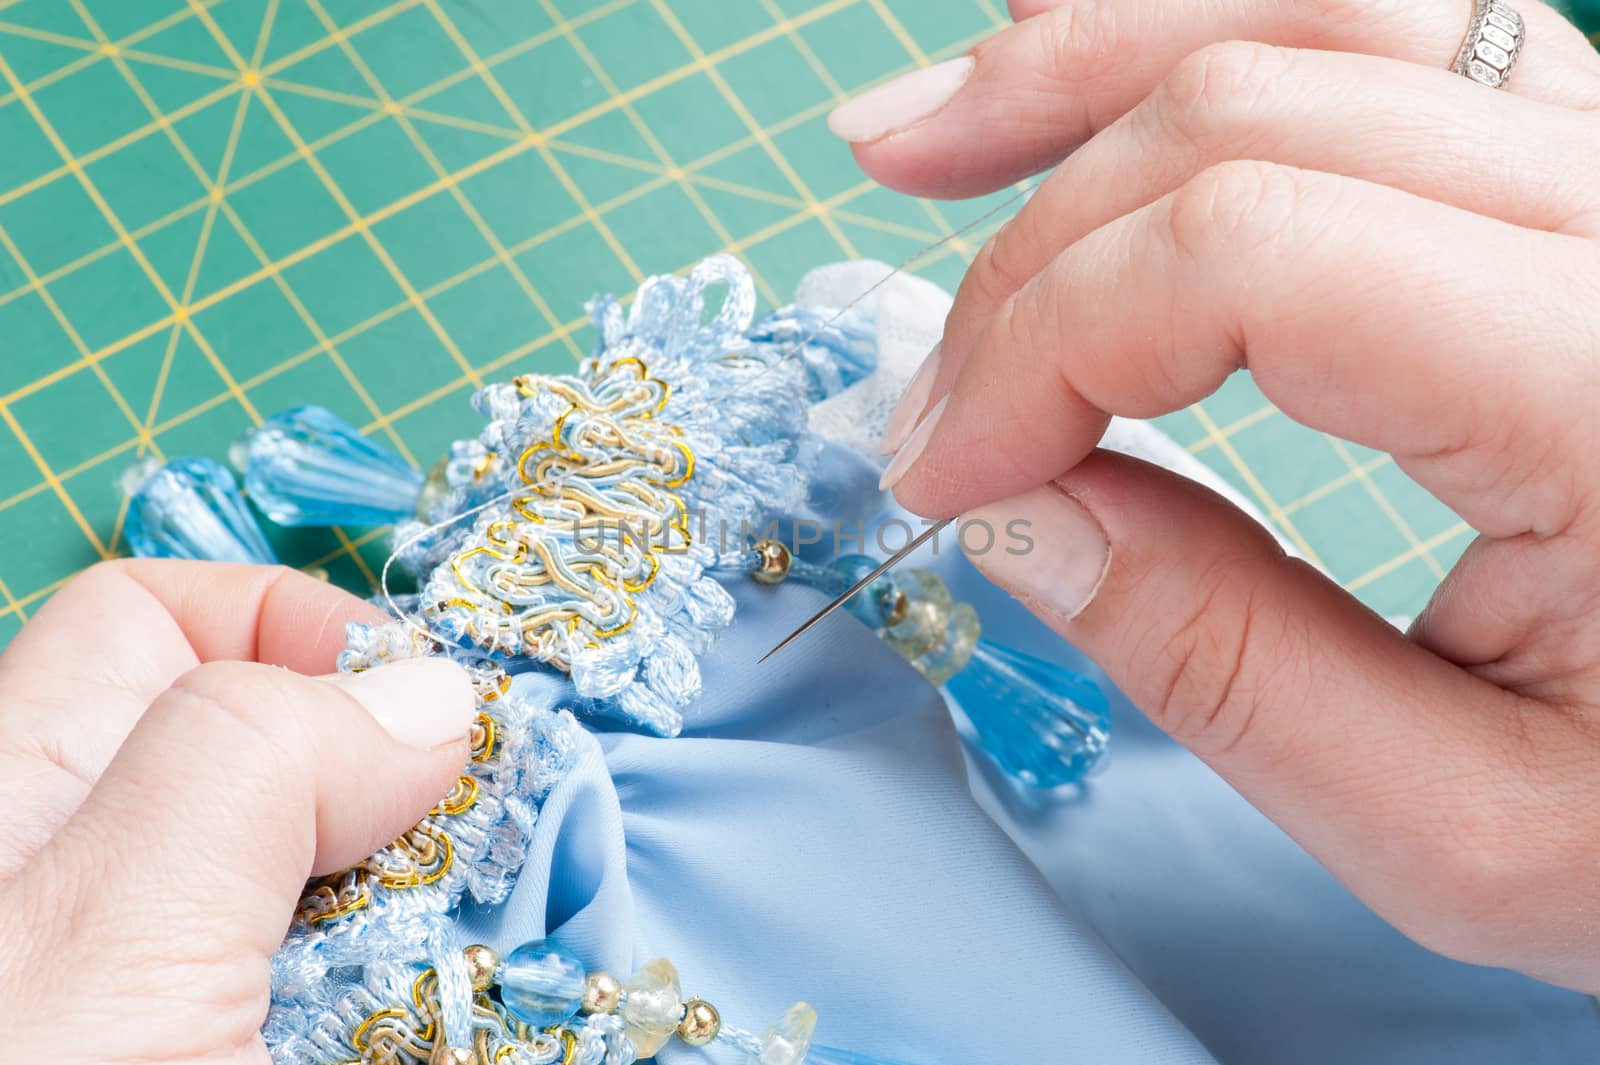 woman sews a decorative element to clothes with a needle by Garry518